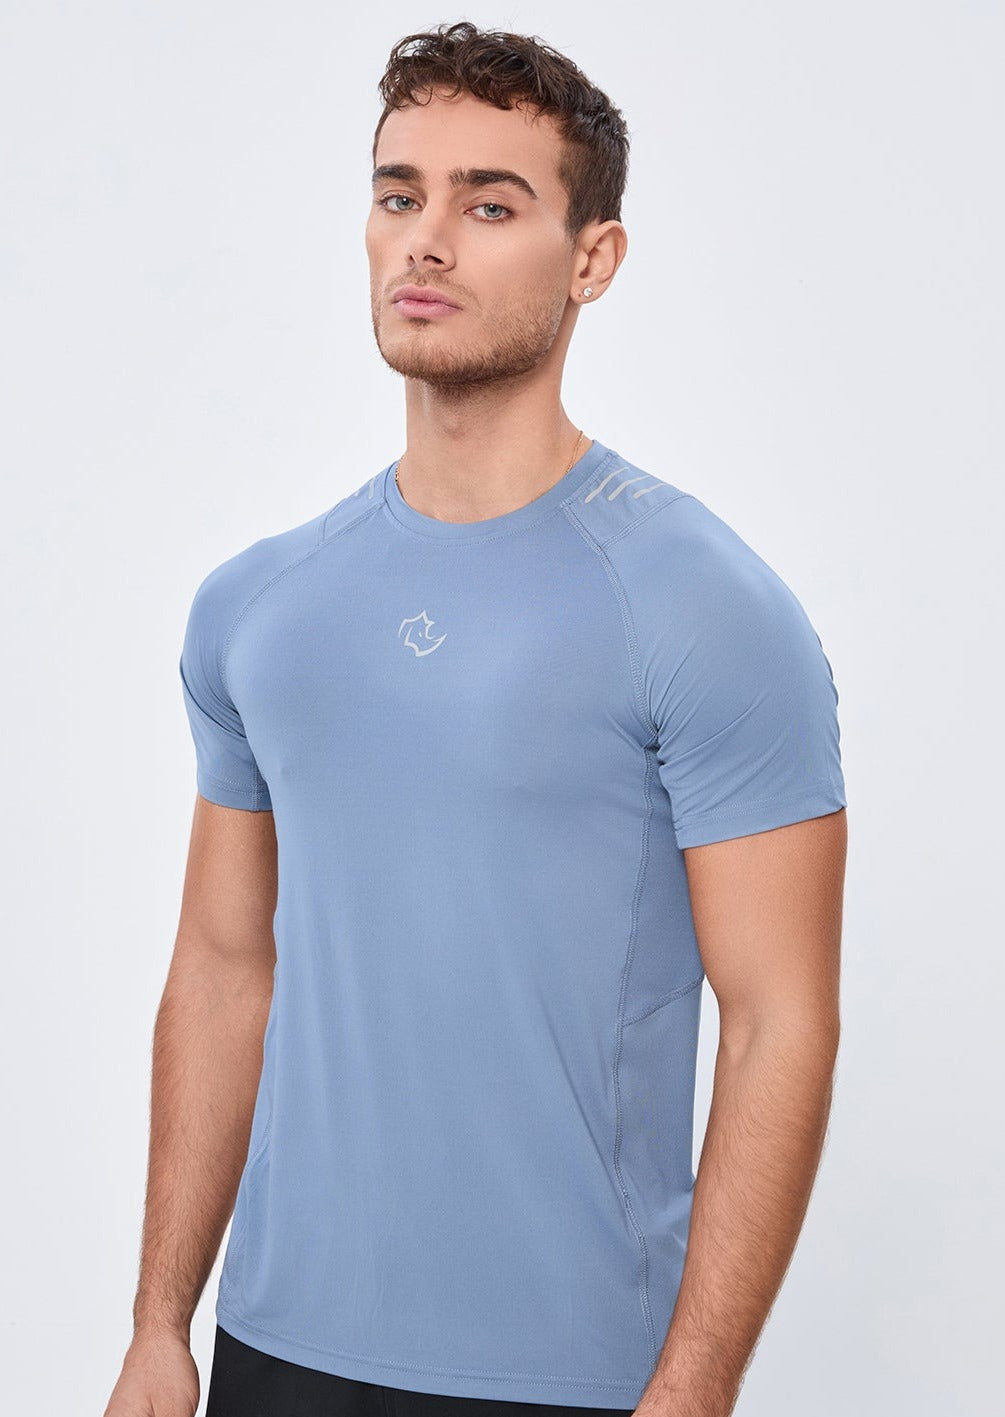 COMPRESSION FIT Tshirts CORE TEE - STONE BLUE